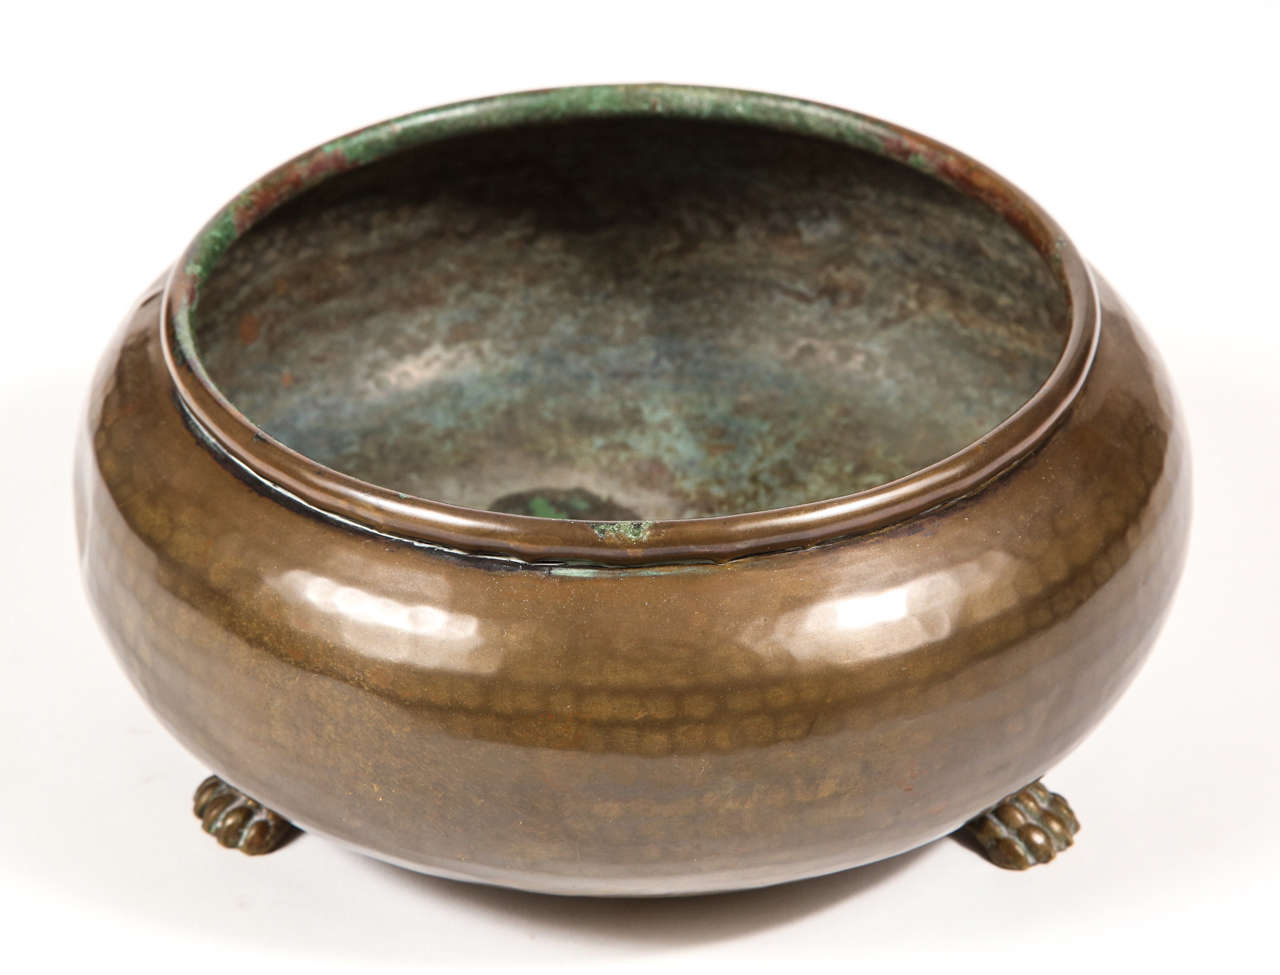 Hammered brass tone metal pot with light verdigris patina and paw feet.